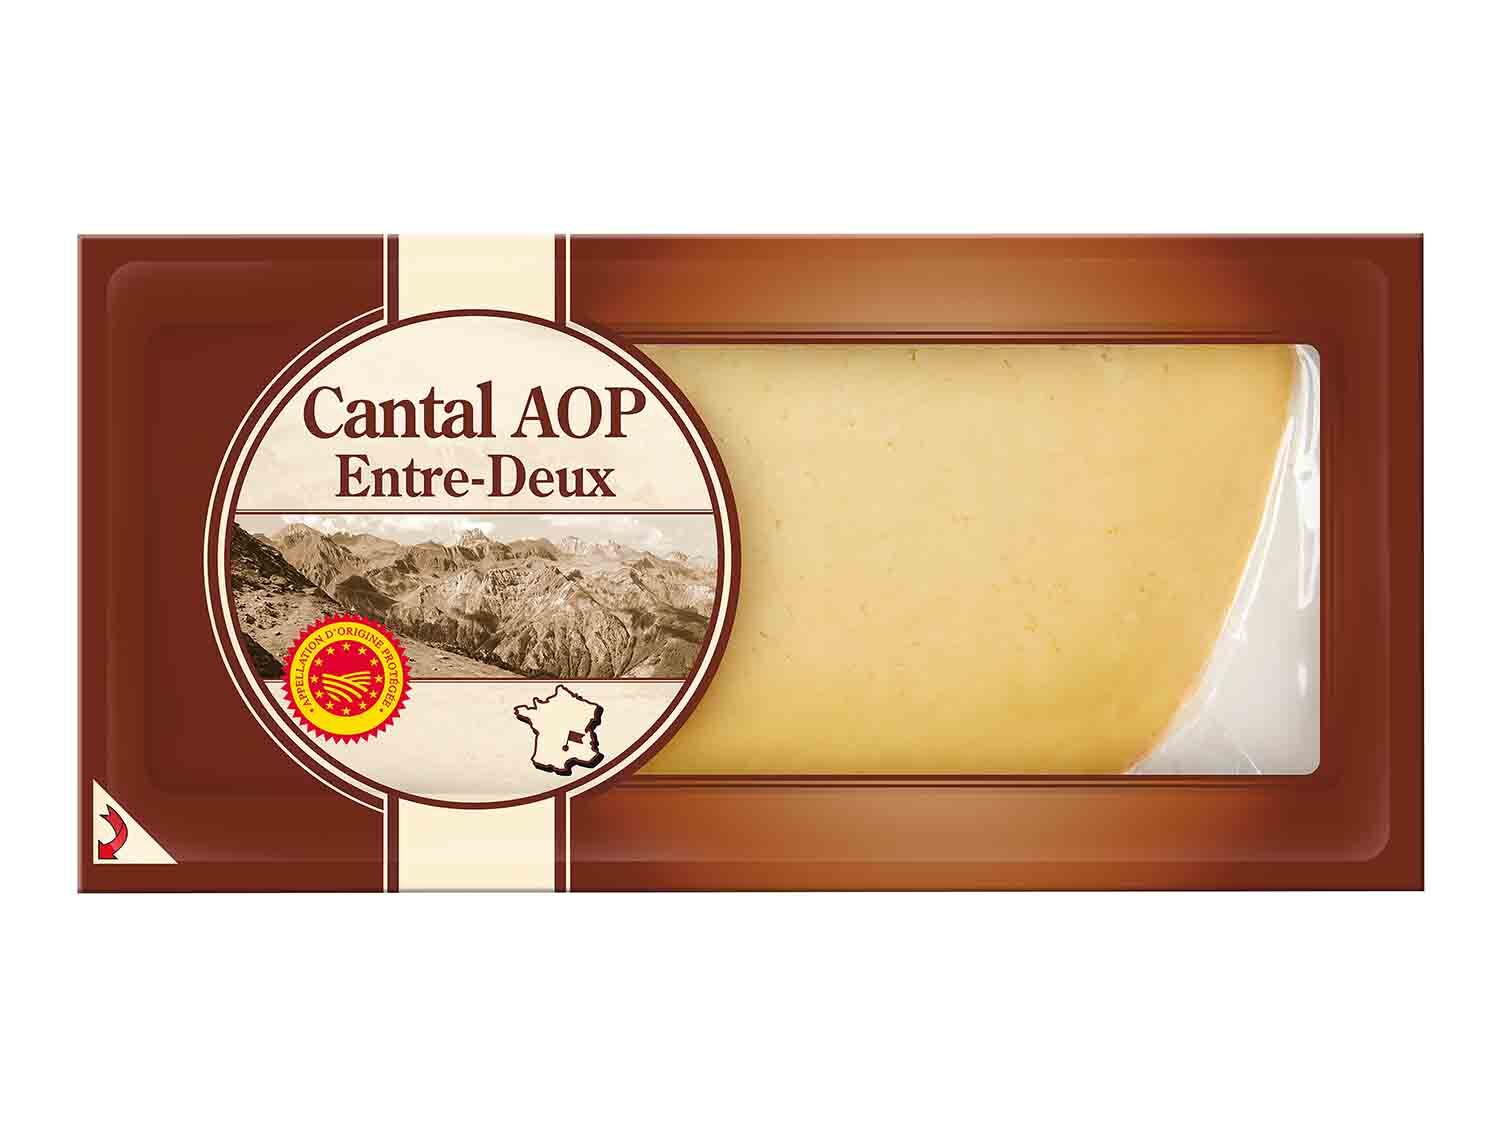 Queso Cantal